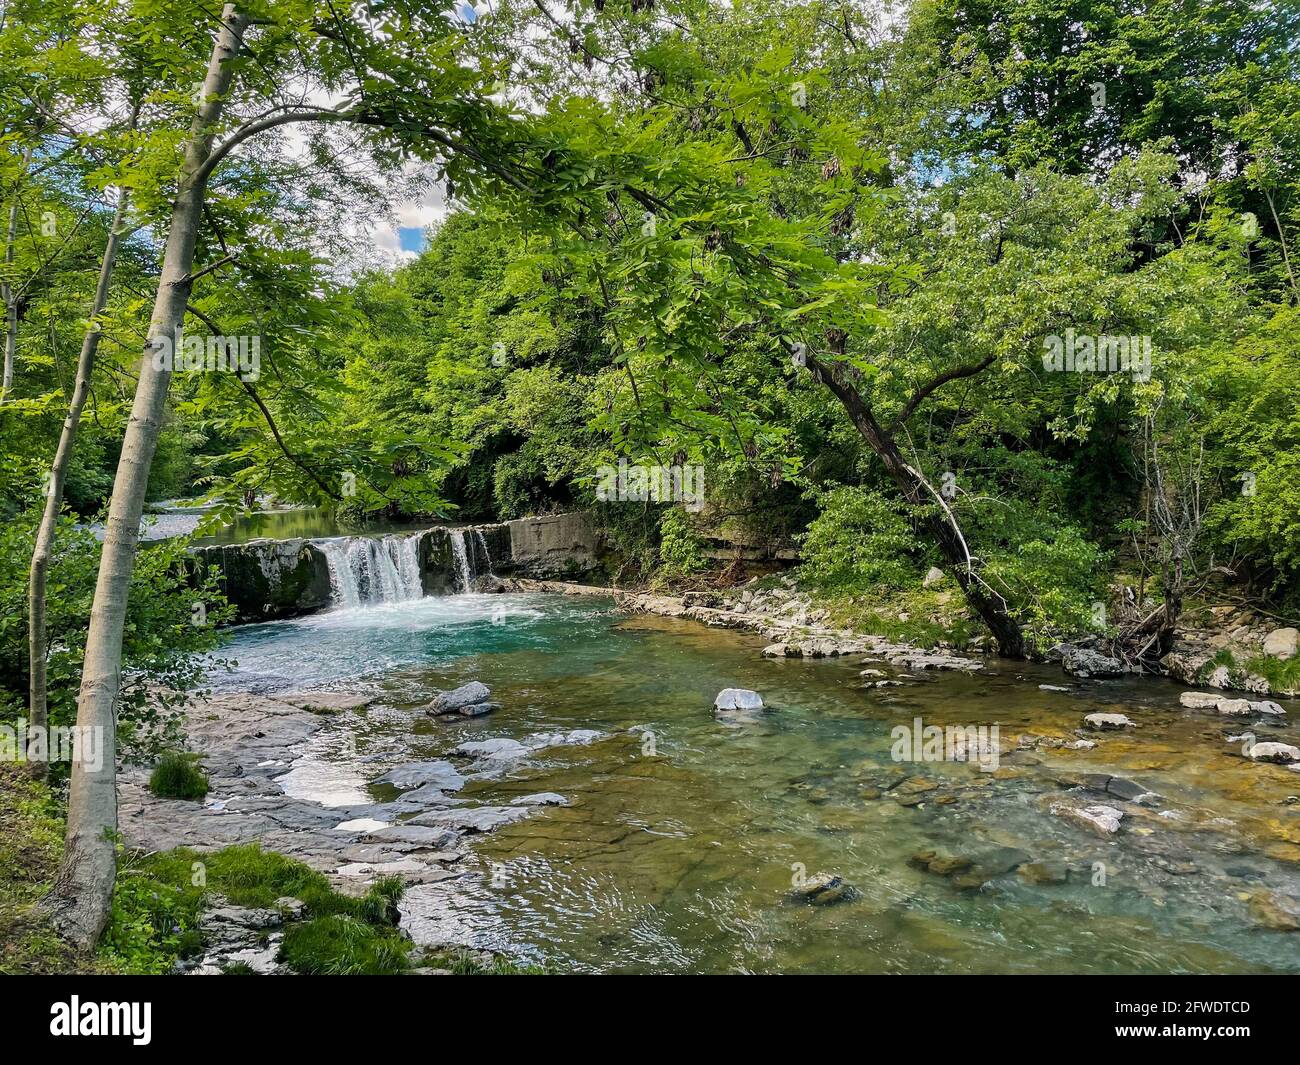 A river with a small cascade of water flows between the trees of a forest on a sunny day Stock Photo